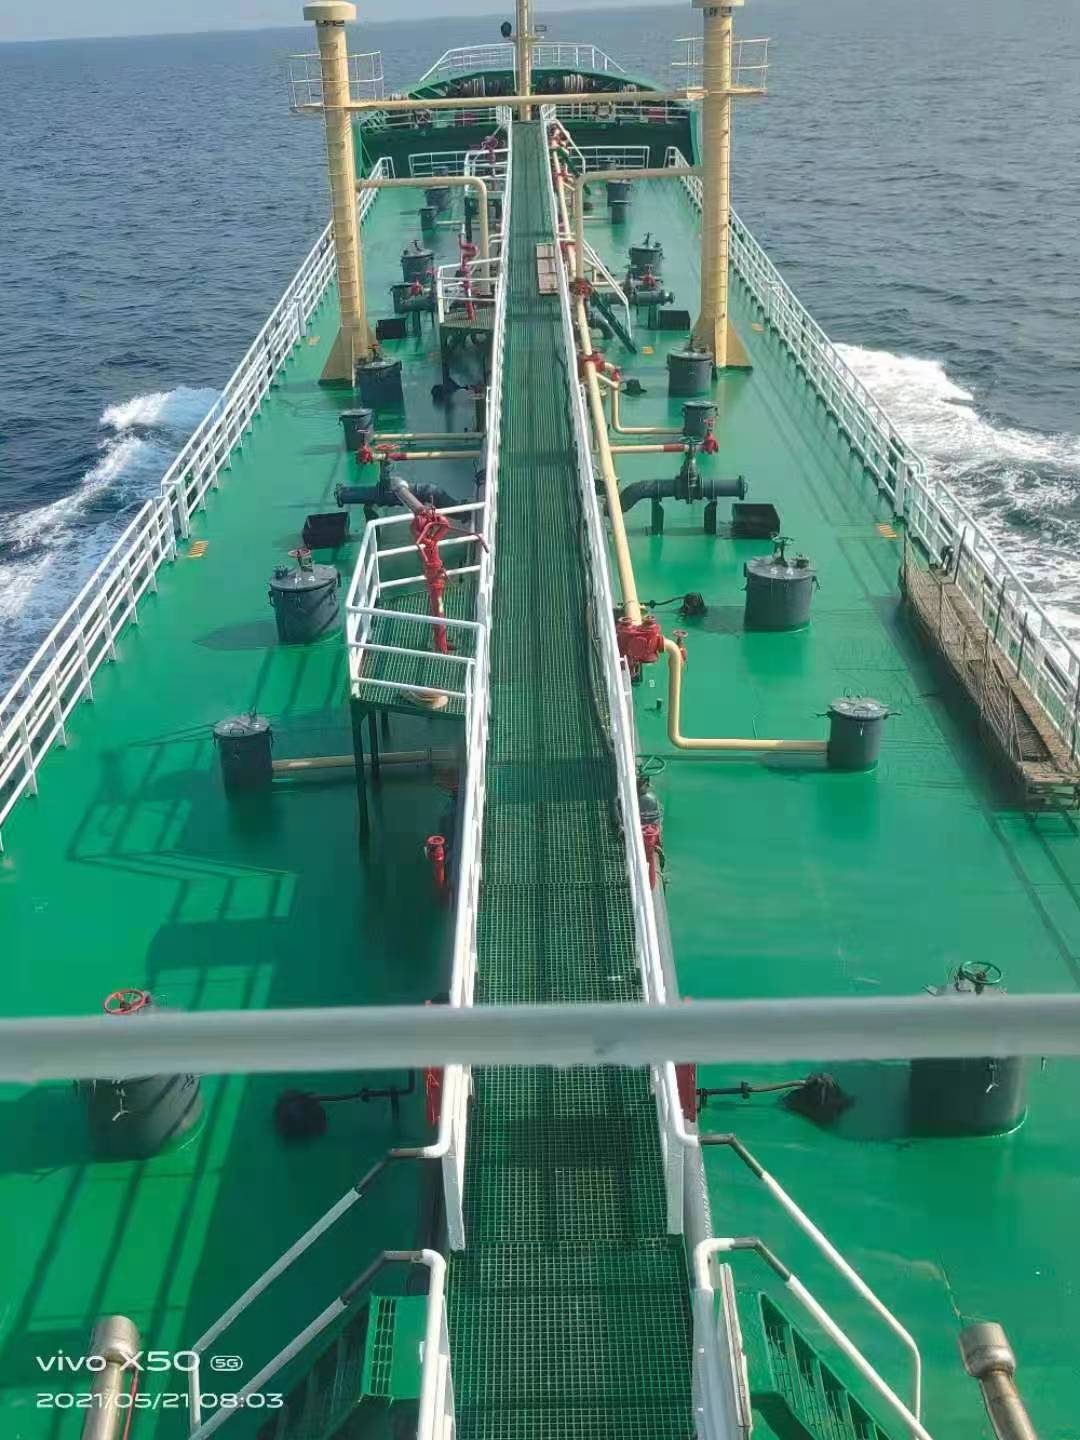 4604 T Product Oil Tanker For Sale